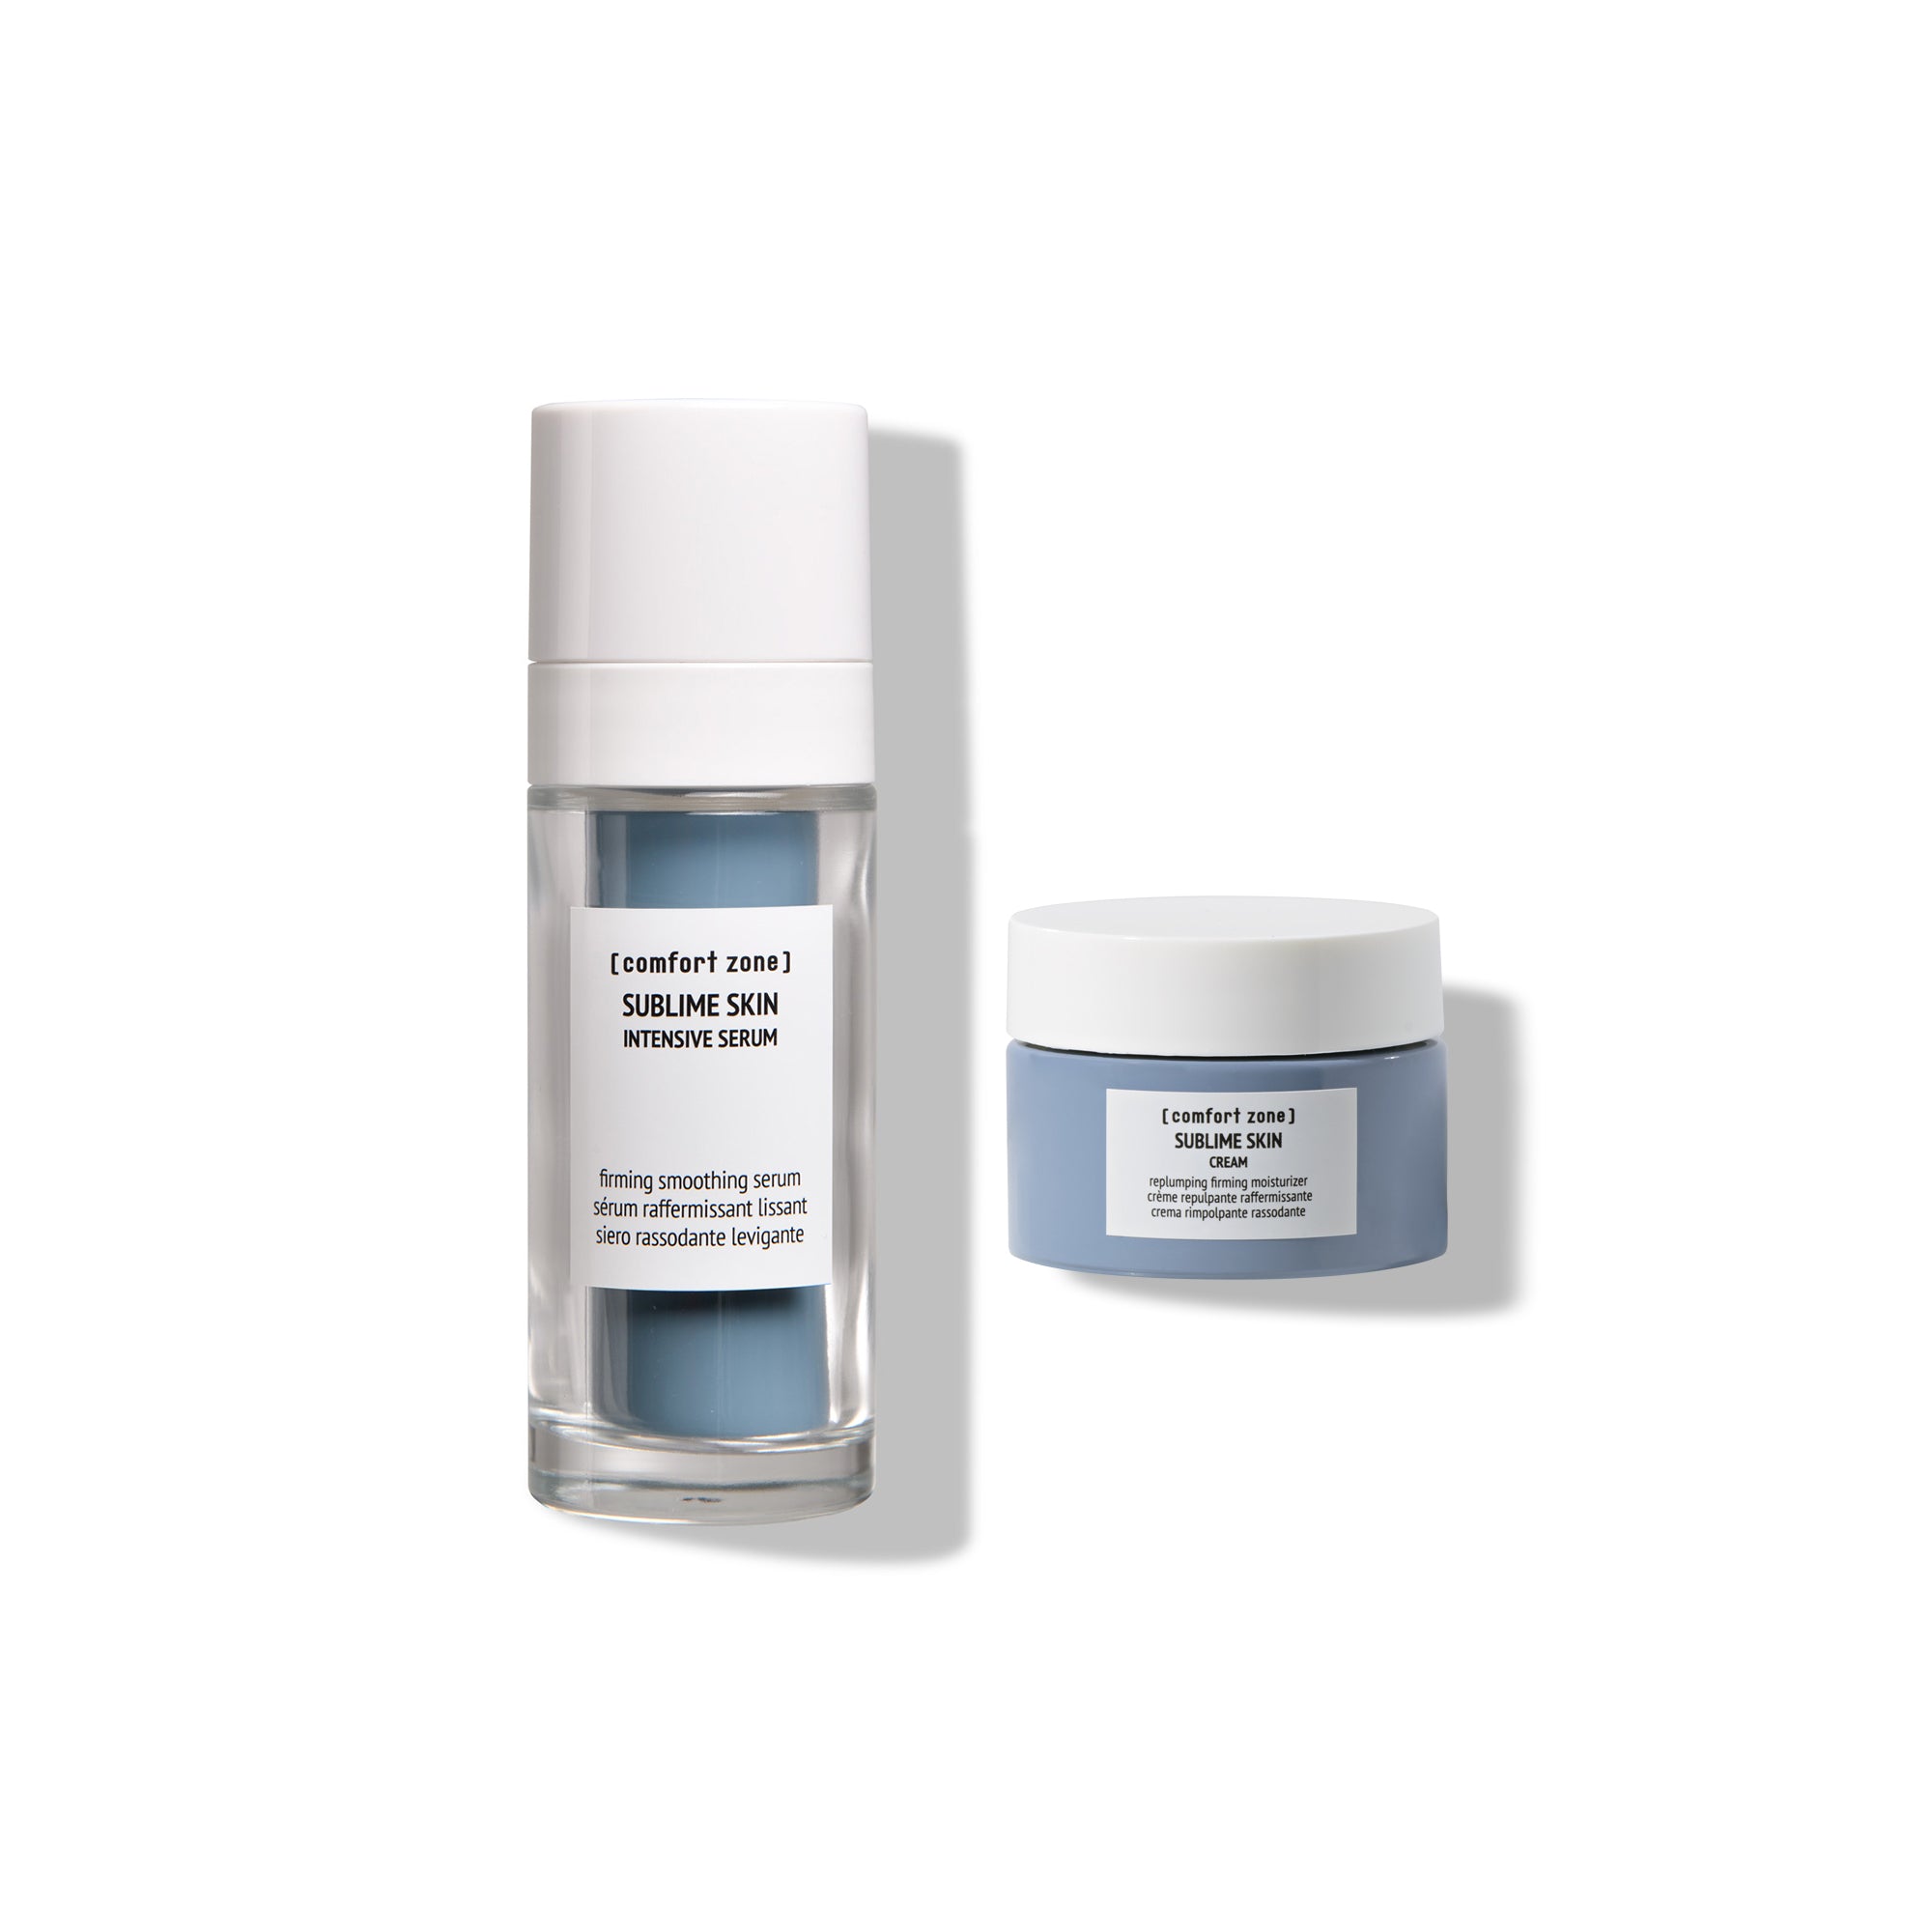 Comfort Zone: KIT ANTI-AGE DUO Firming and replumping set-
